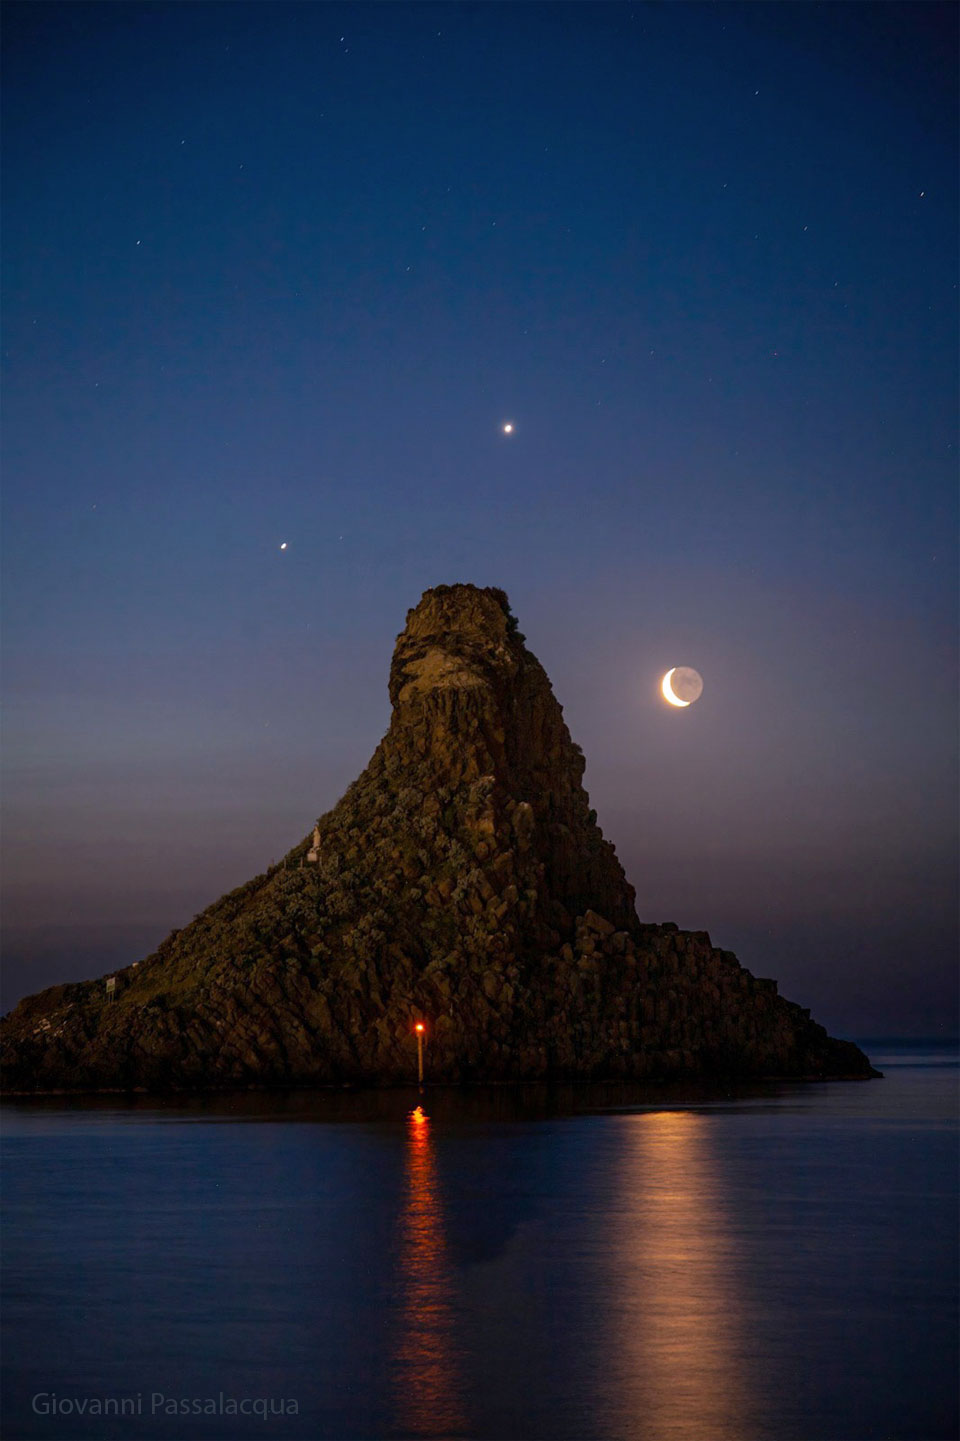 A seascape surrounds a large tree-covered hill. Surrounding the hill
in the night sky are three bright dots: the planets Jupiter, Venus,
and a crescent Moon.
Please see the explanation for more detailed information.